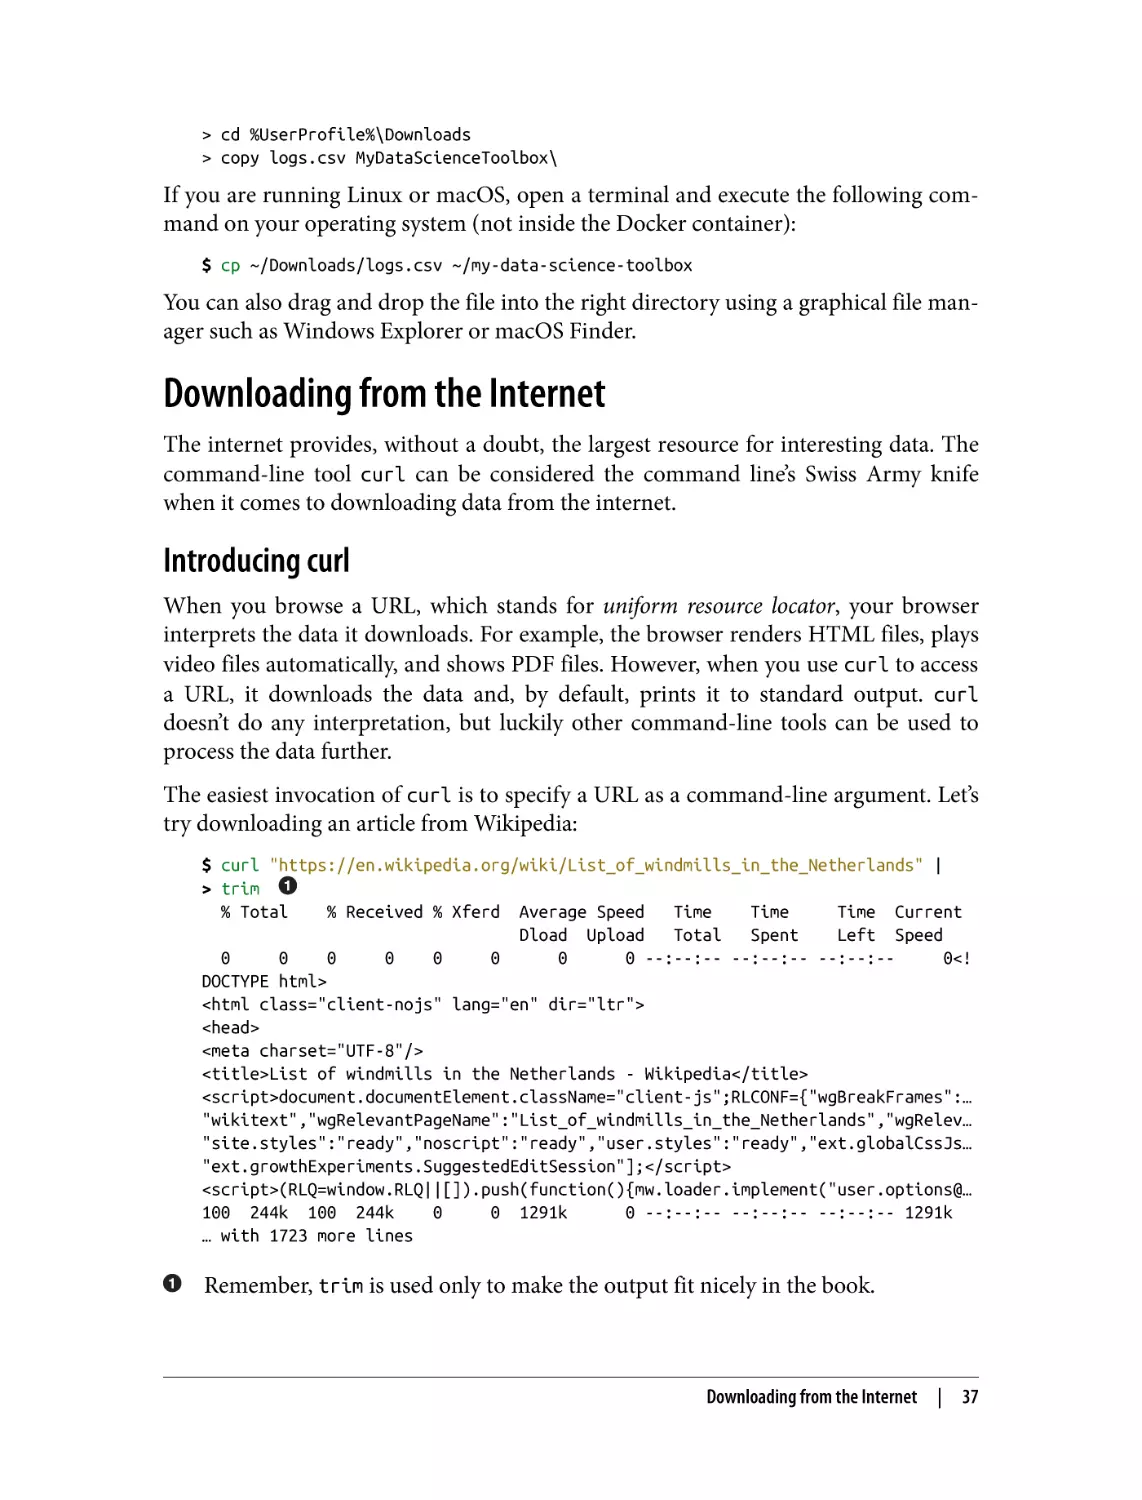 Downloading from the Internet
Introducing curl